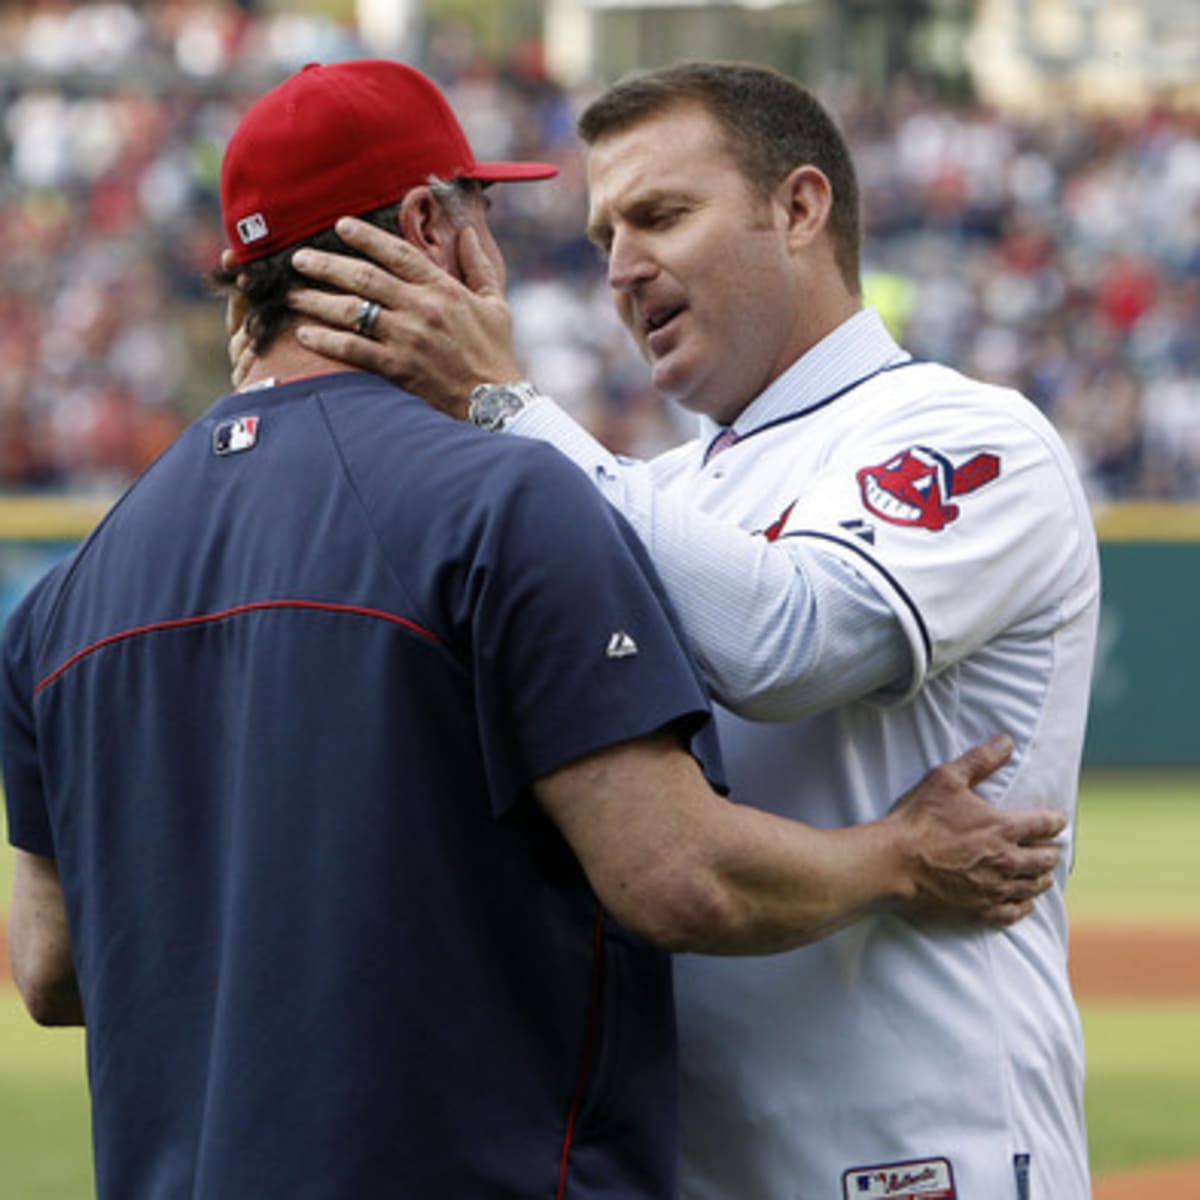 White Sox honor Jim Thome before game against Indians